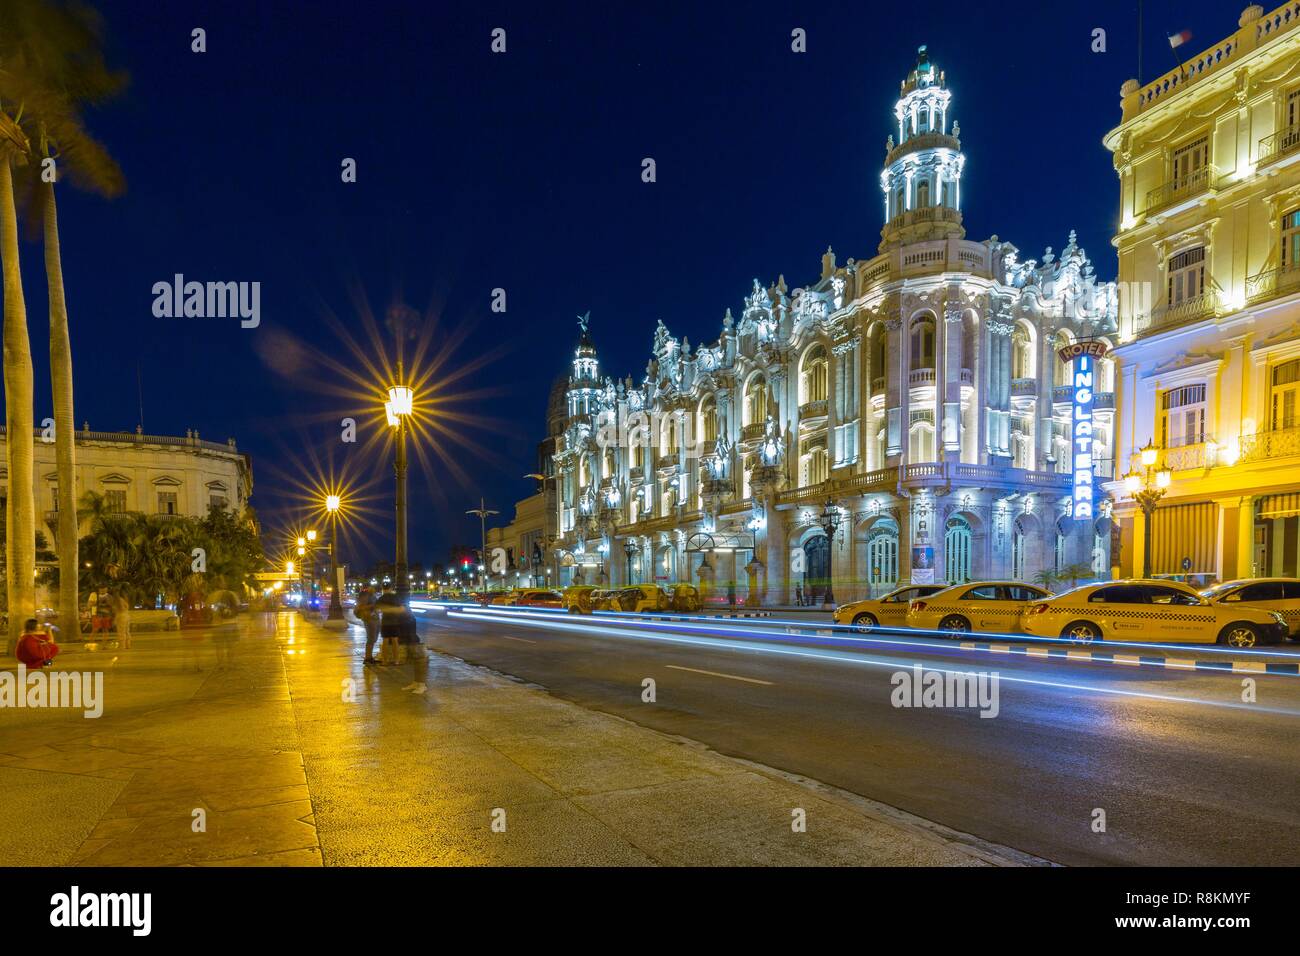 Cuba, Havana, district of Habana Vieja classified World Heritage by UNESCO, the Paseo de Marti or Prado, avenue lined with elegant mansions connecting the Malecon to the Capitol, the Parque Central, the Grand Theater of Havana (Gran Teatro de La Habana) and Inglaterra Hotel Stock Photo